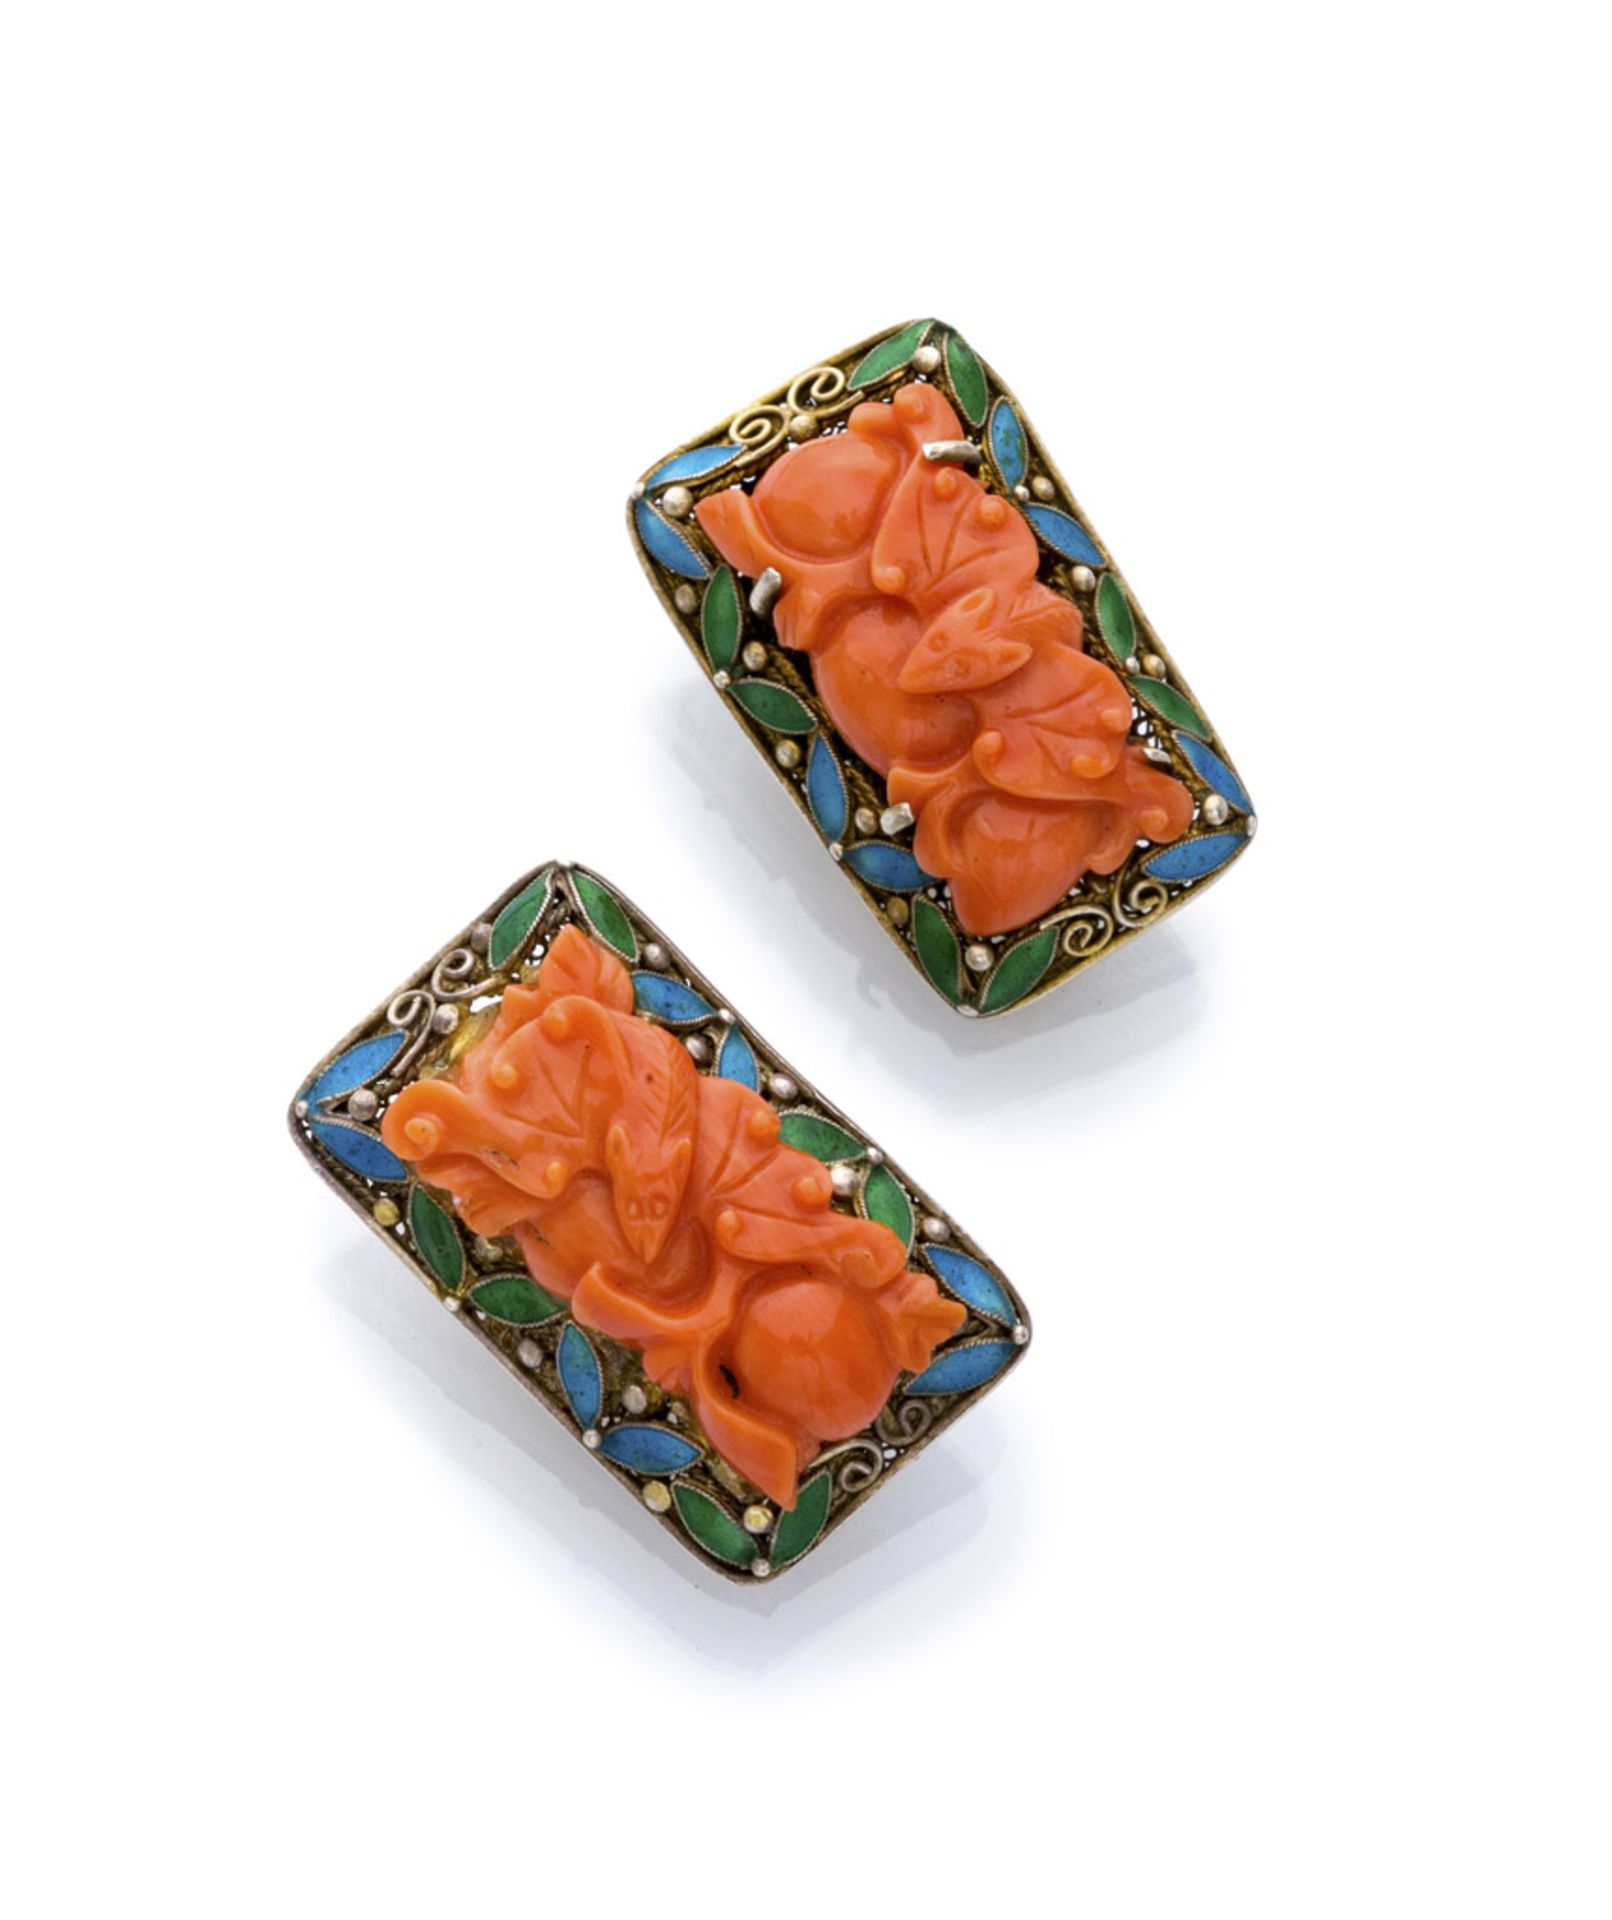 A PAIR OF EARRINGS in silver, with pink corals engraved with bat motifs set on a mount of